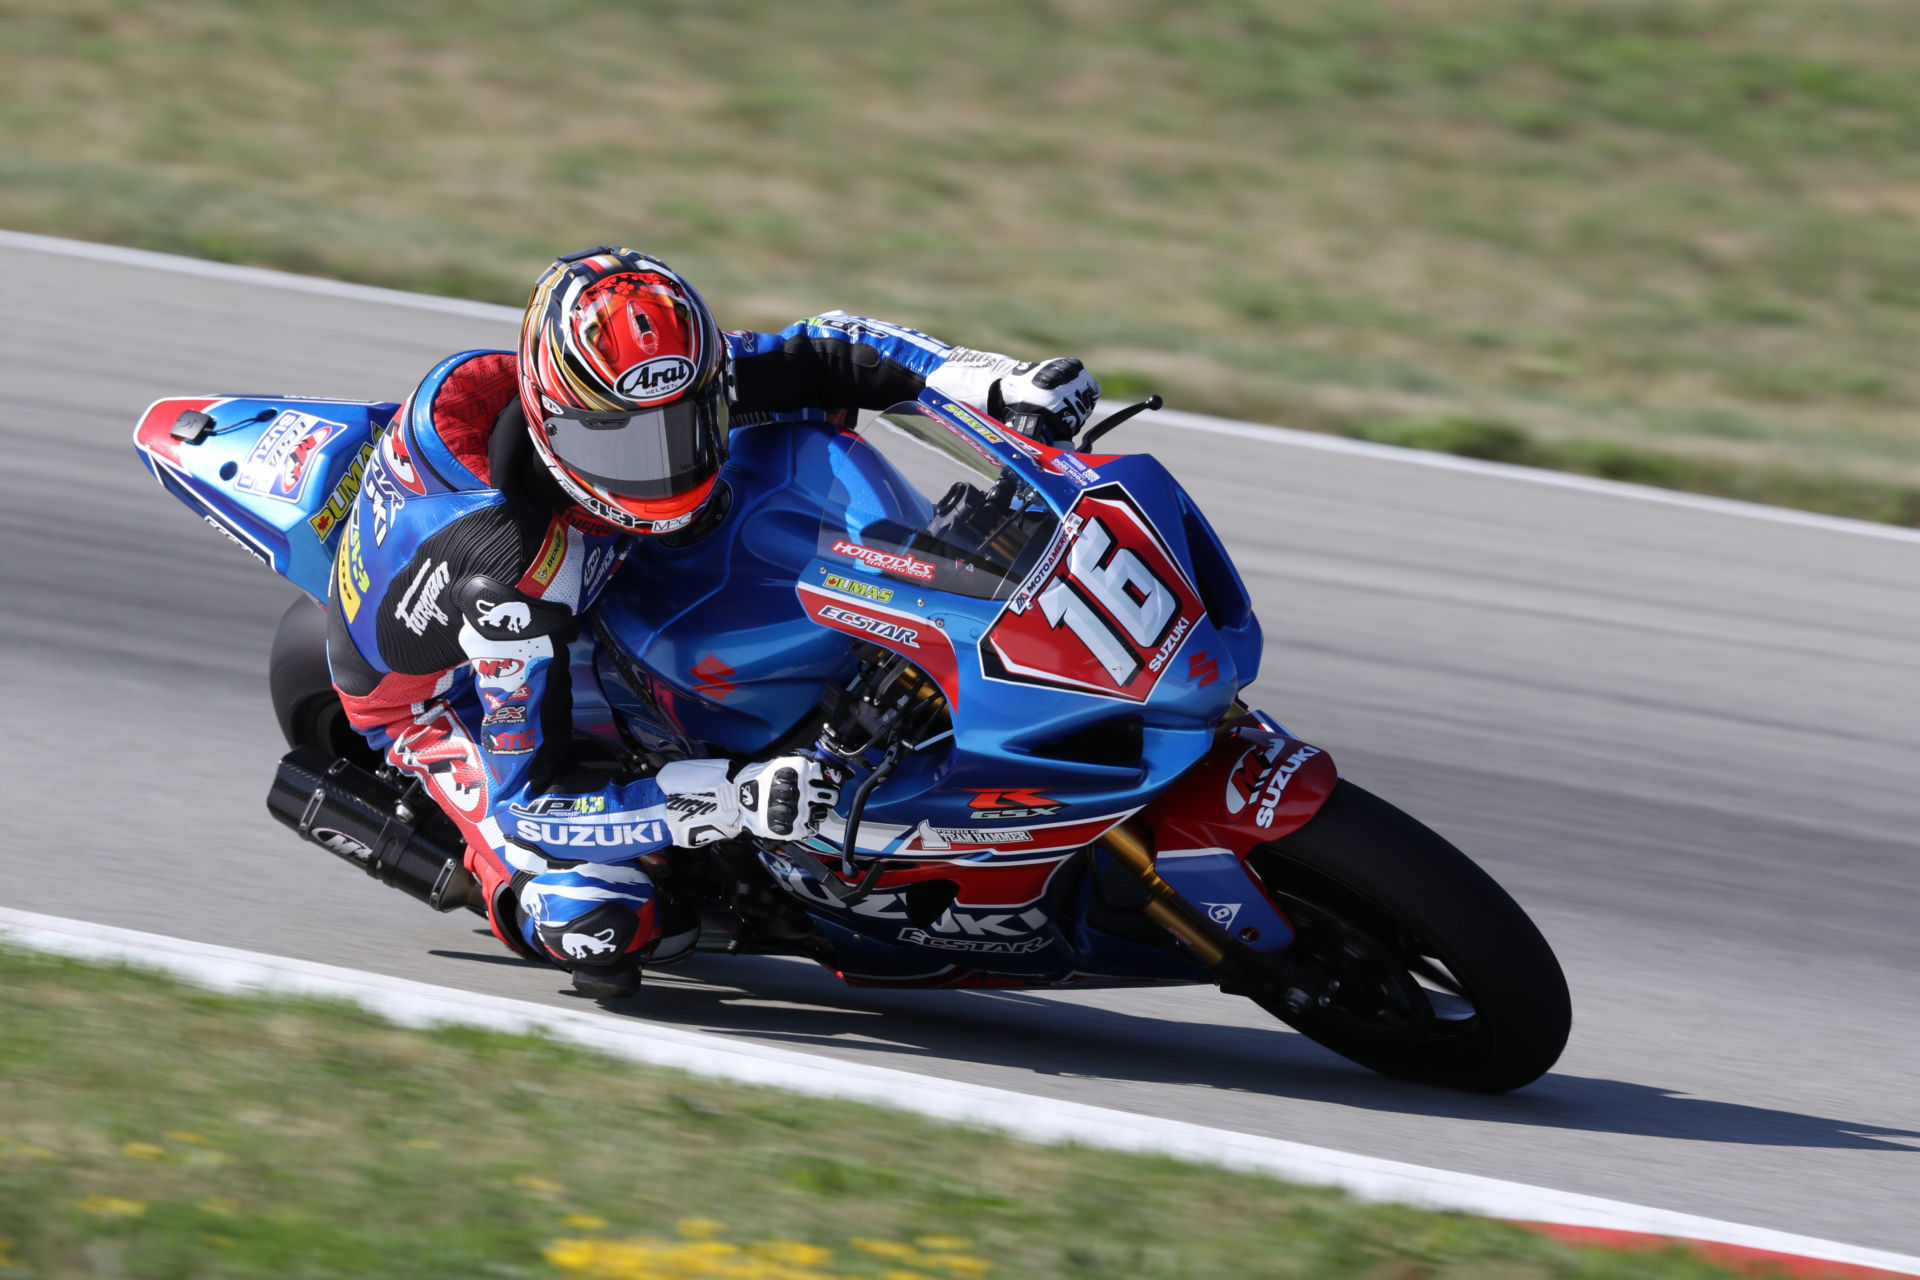 Alex Dumas (16) nearly won the first Stock 1000 race and made his Superbike debut. Photo by Brian J. Nelson, courtesy Suzuki Motor of America, Inc.